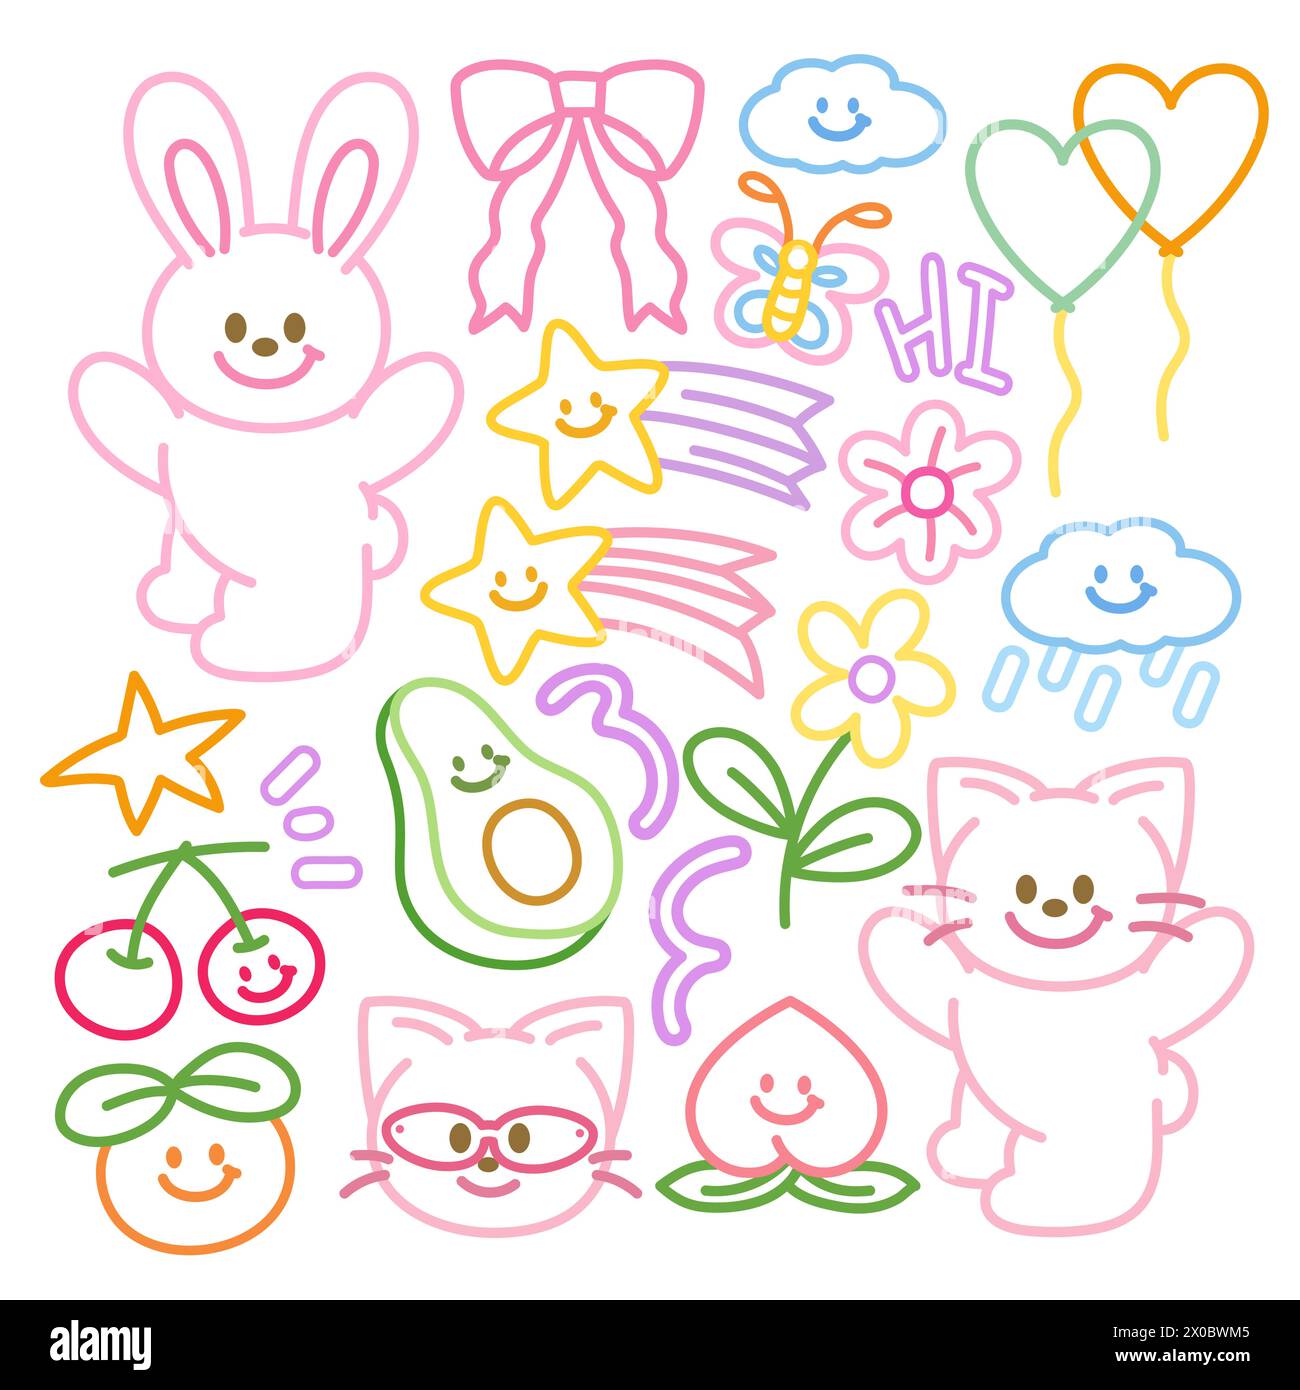 Cute doodle outlines of pink bunny, butterfly, cat, cherry, avocado, orange, peach, pink ribbon, cloud, rain, flowers, shooting star, heart balloon Stock Vector